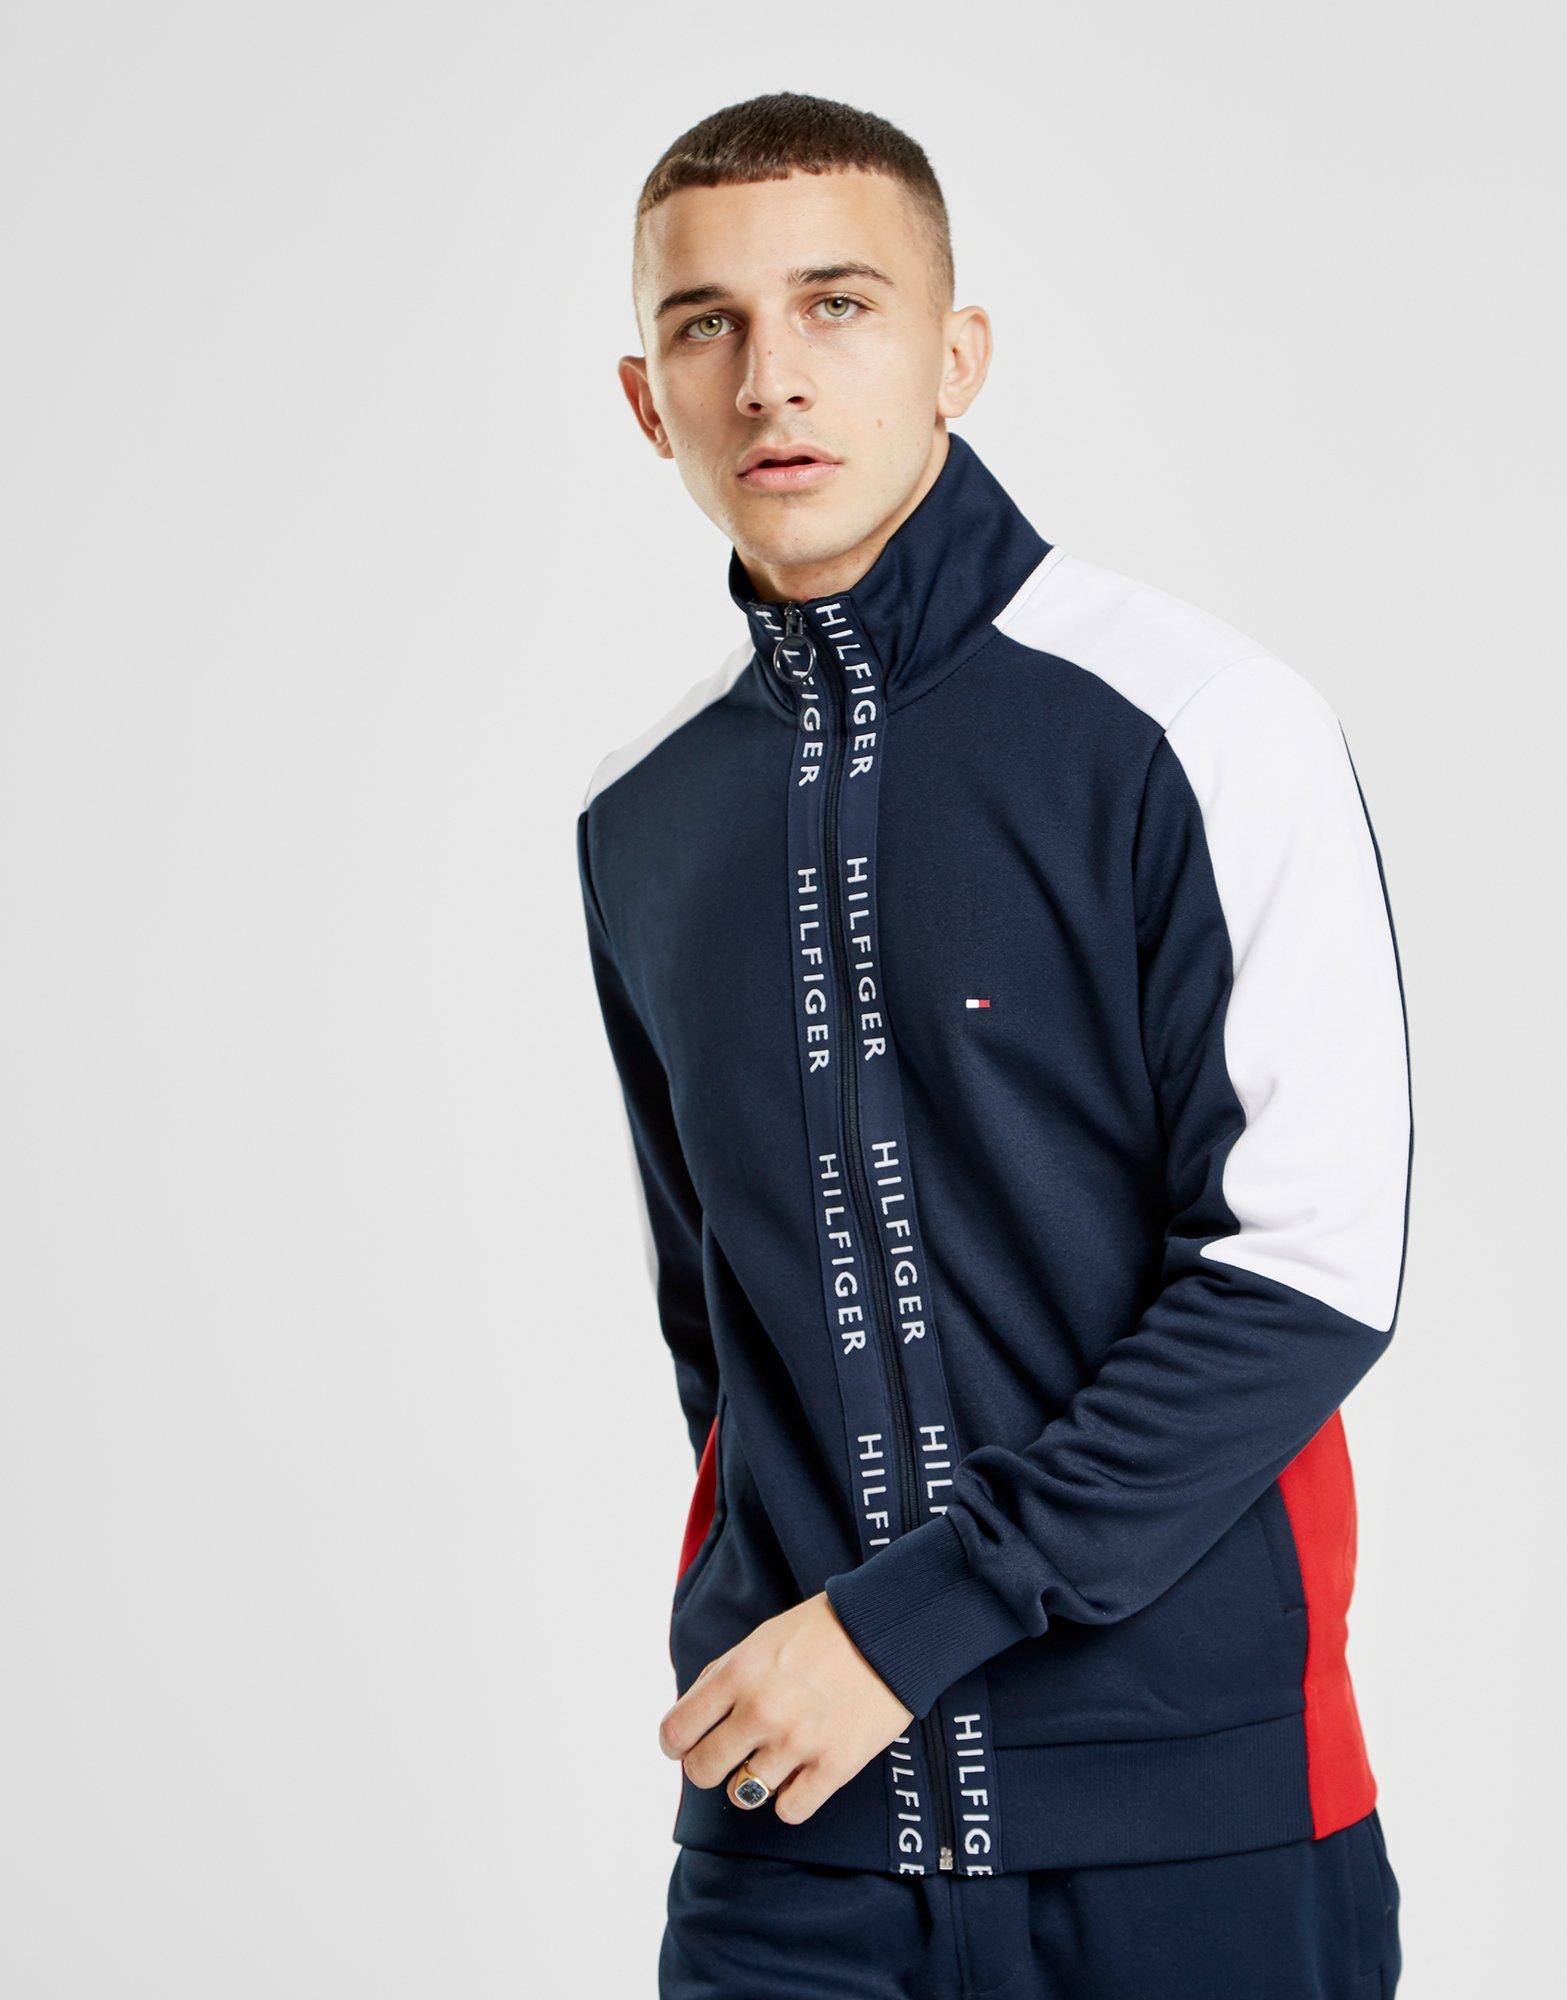 Tommy Hilfiger Colour Block Tape Track Top Latvia, SAVE 41% -  www.rohdeonsports.com